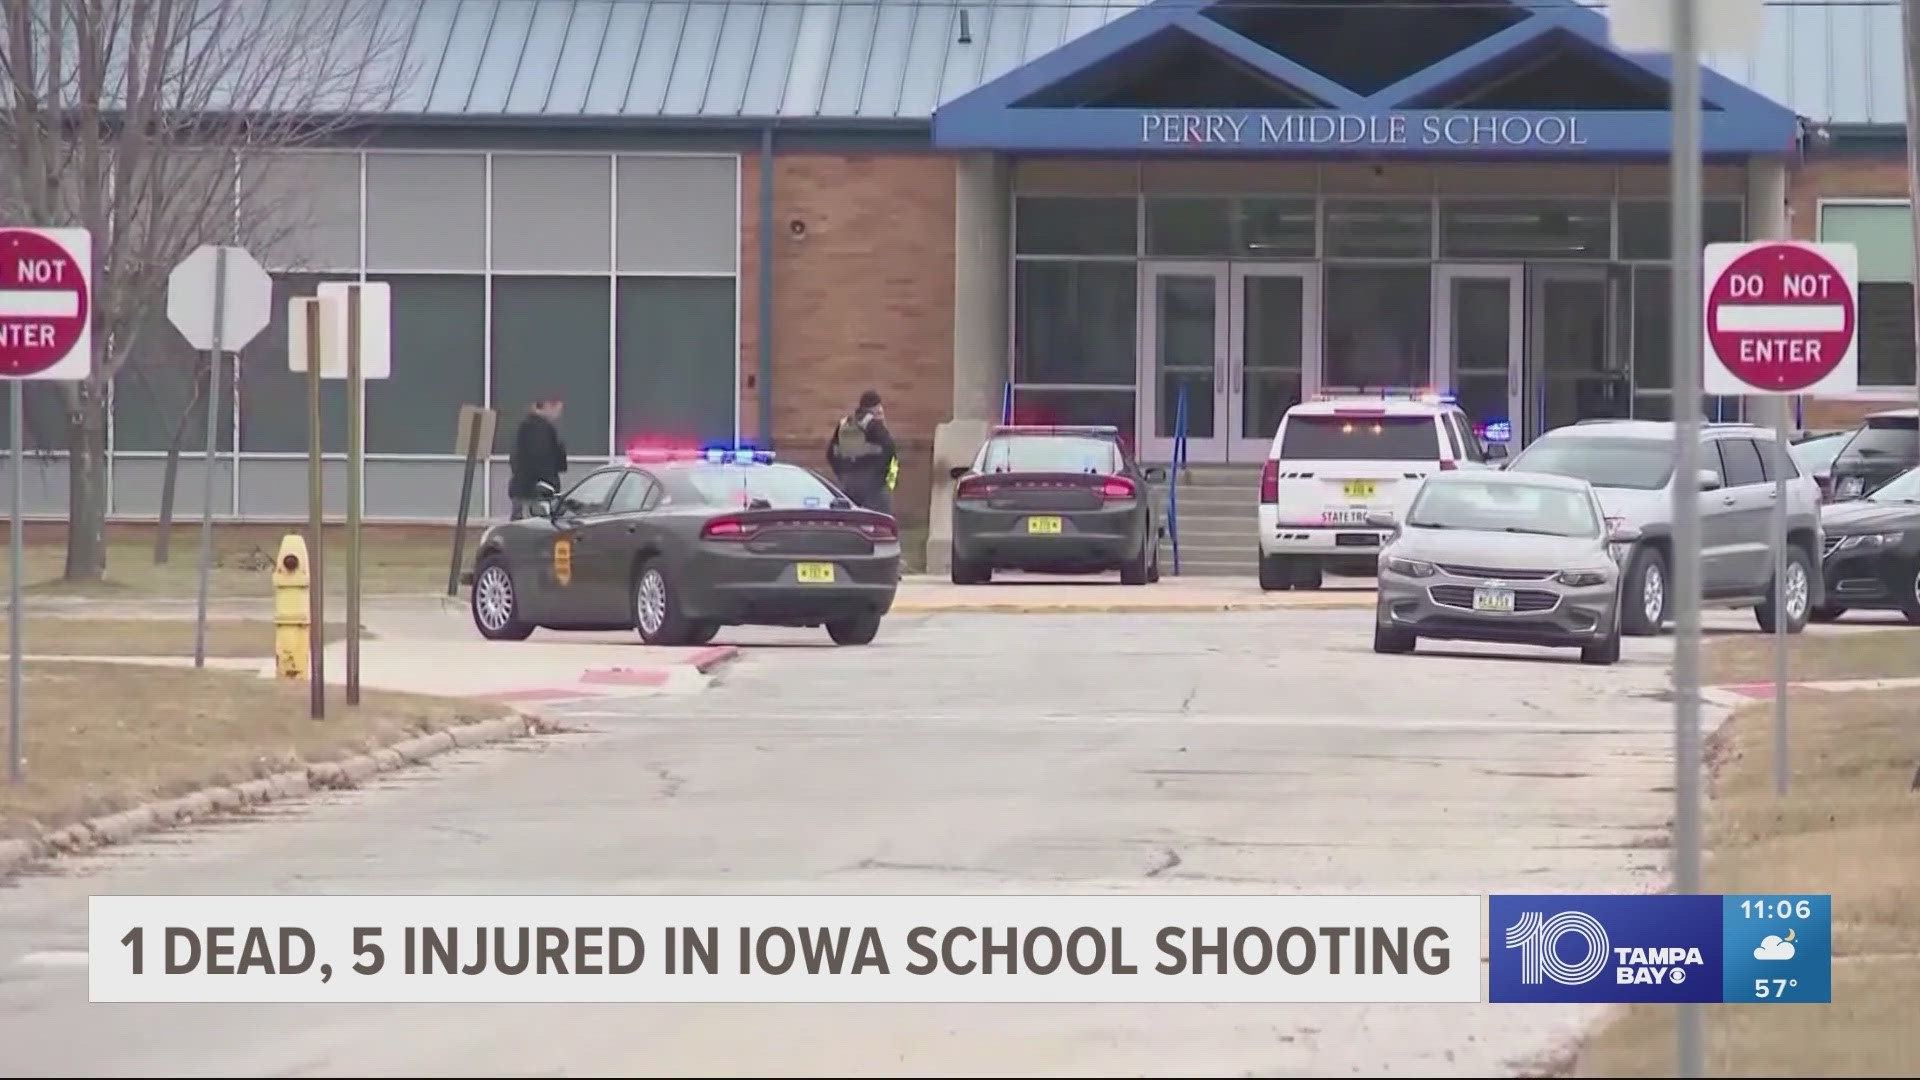 The suspect, a student at the school in Perry, died of what investigators believe is a self-inflicted gunshot wound.